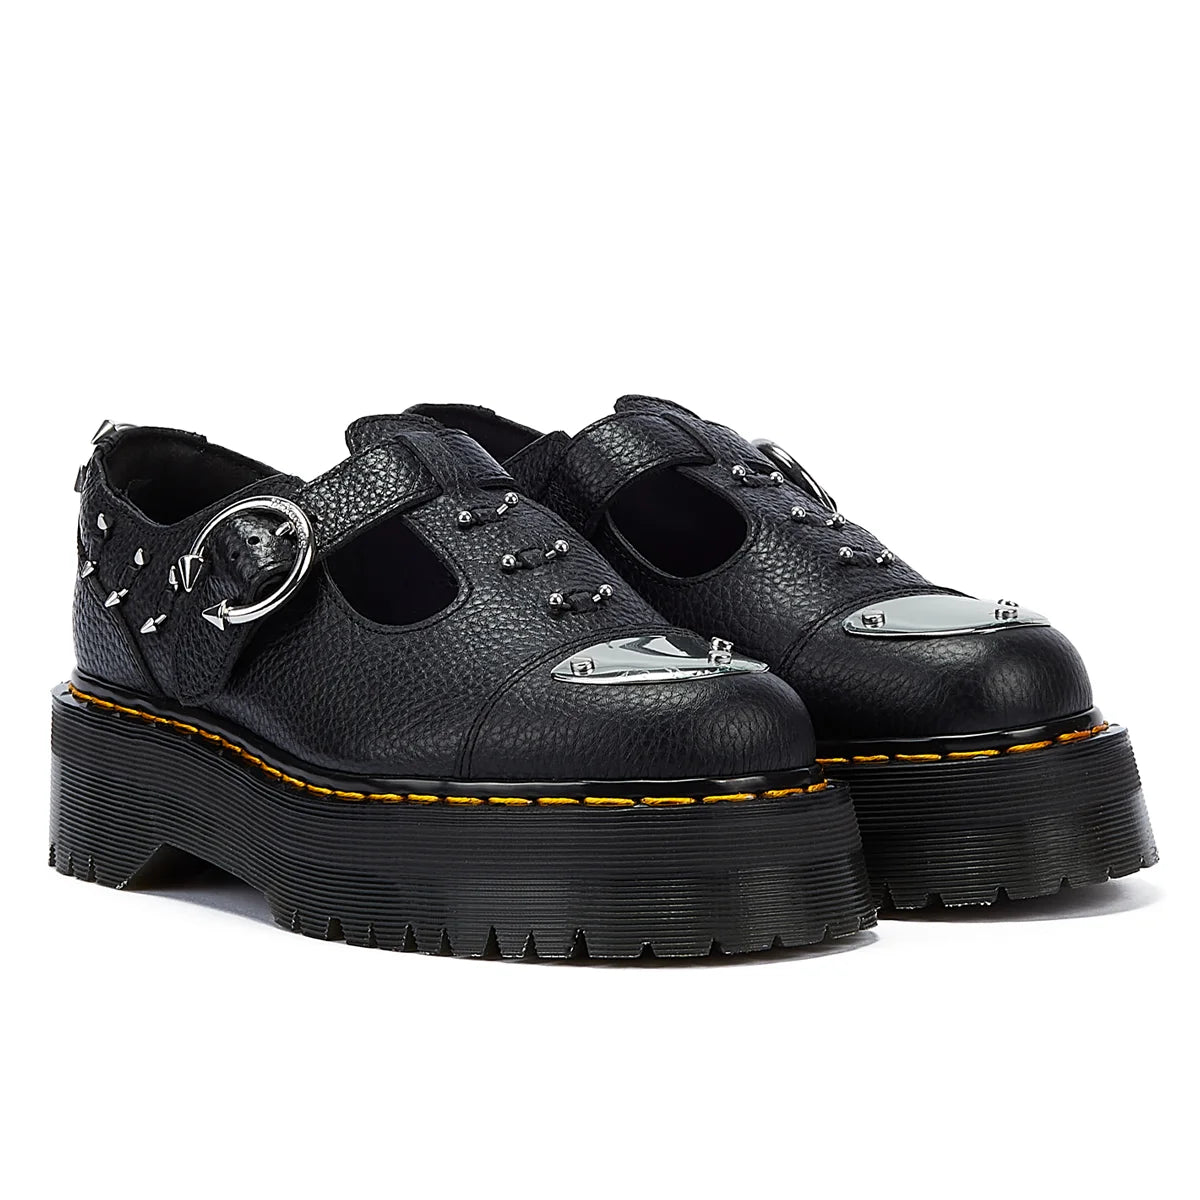 Dr. Martens Bethan Milled Nappa Women’s Mary Jane Shoes